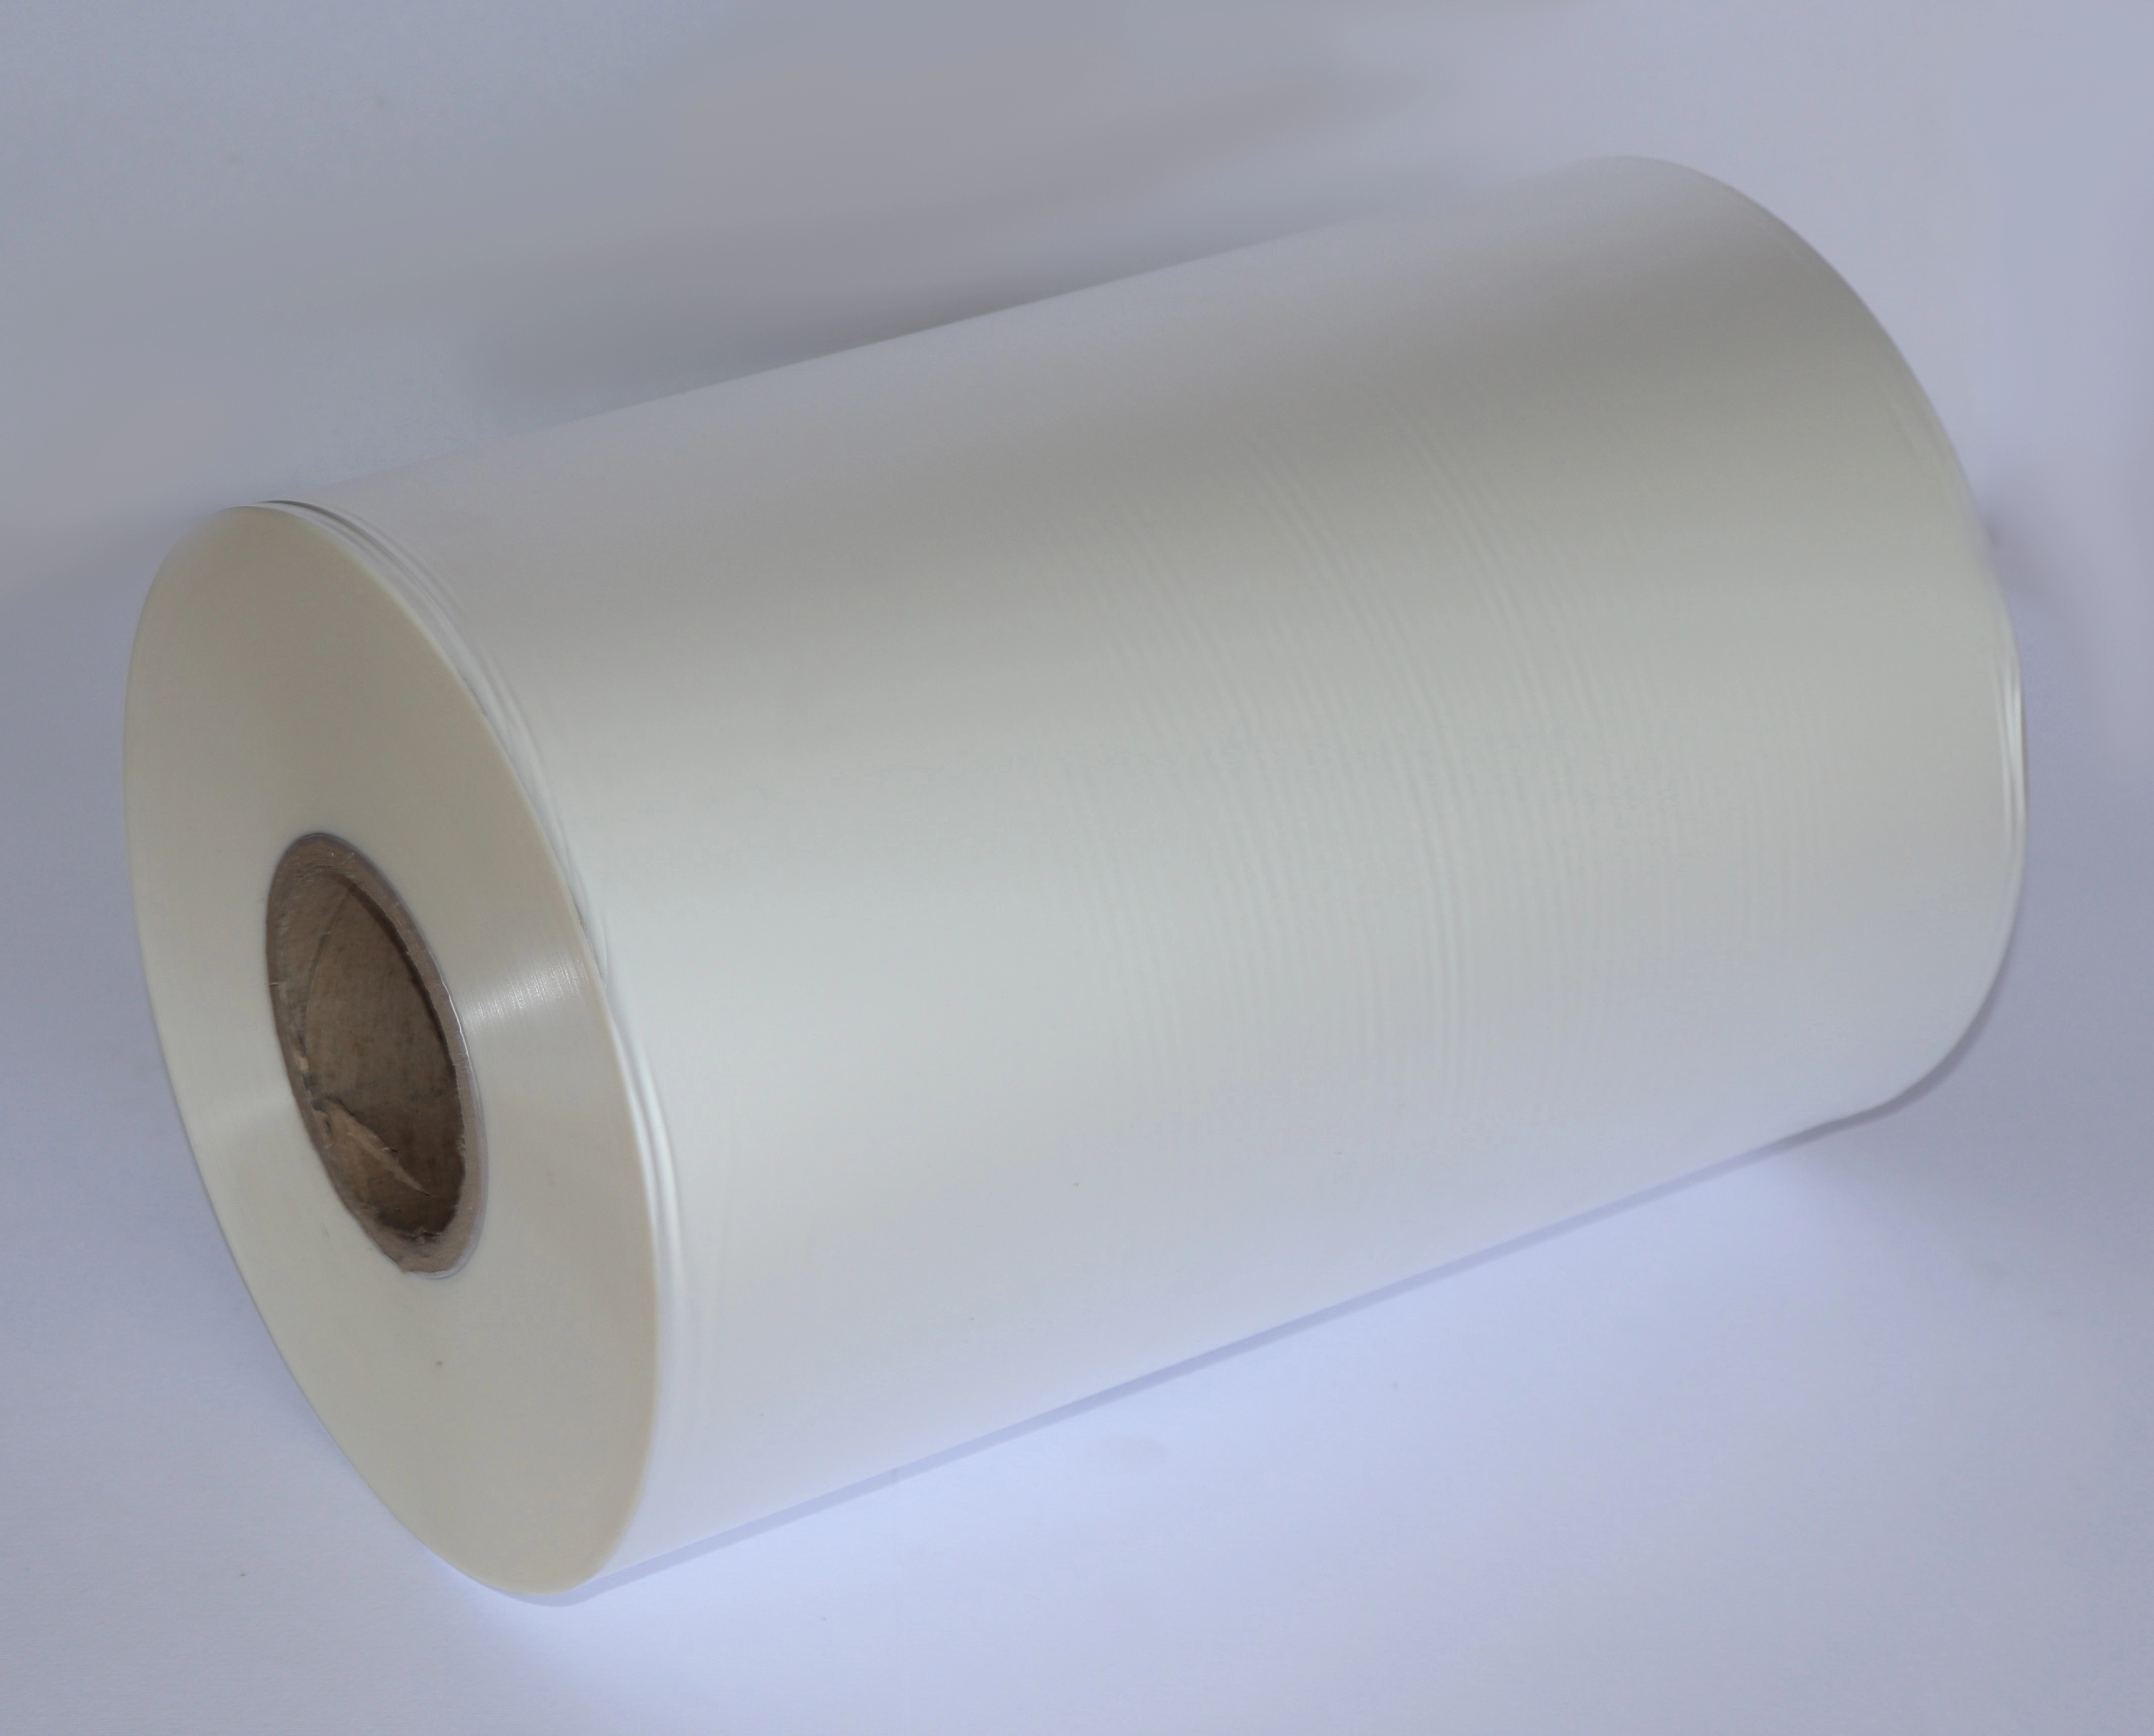 Laminating film for surface protection and moisture prevention sold by Easitape